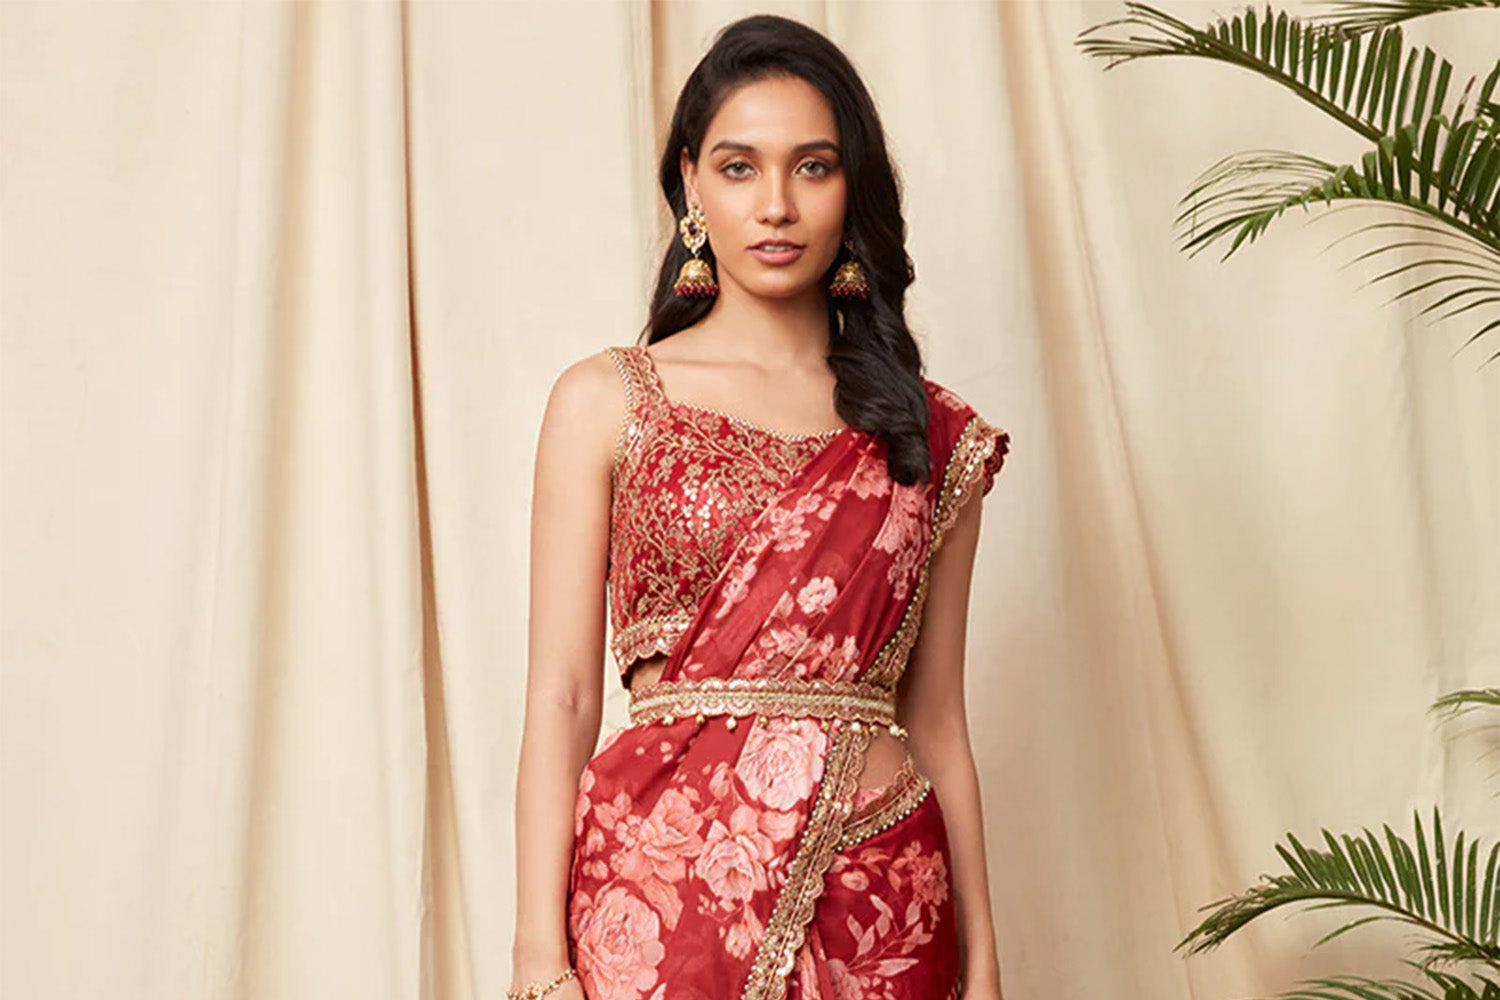 Lehenga or Saree, you don't have to choose just one! Make this